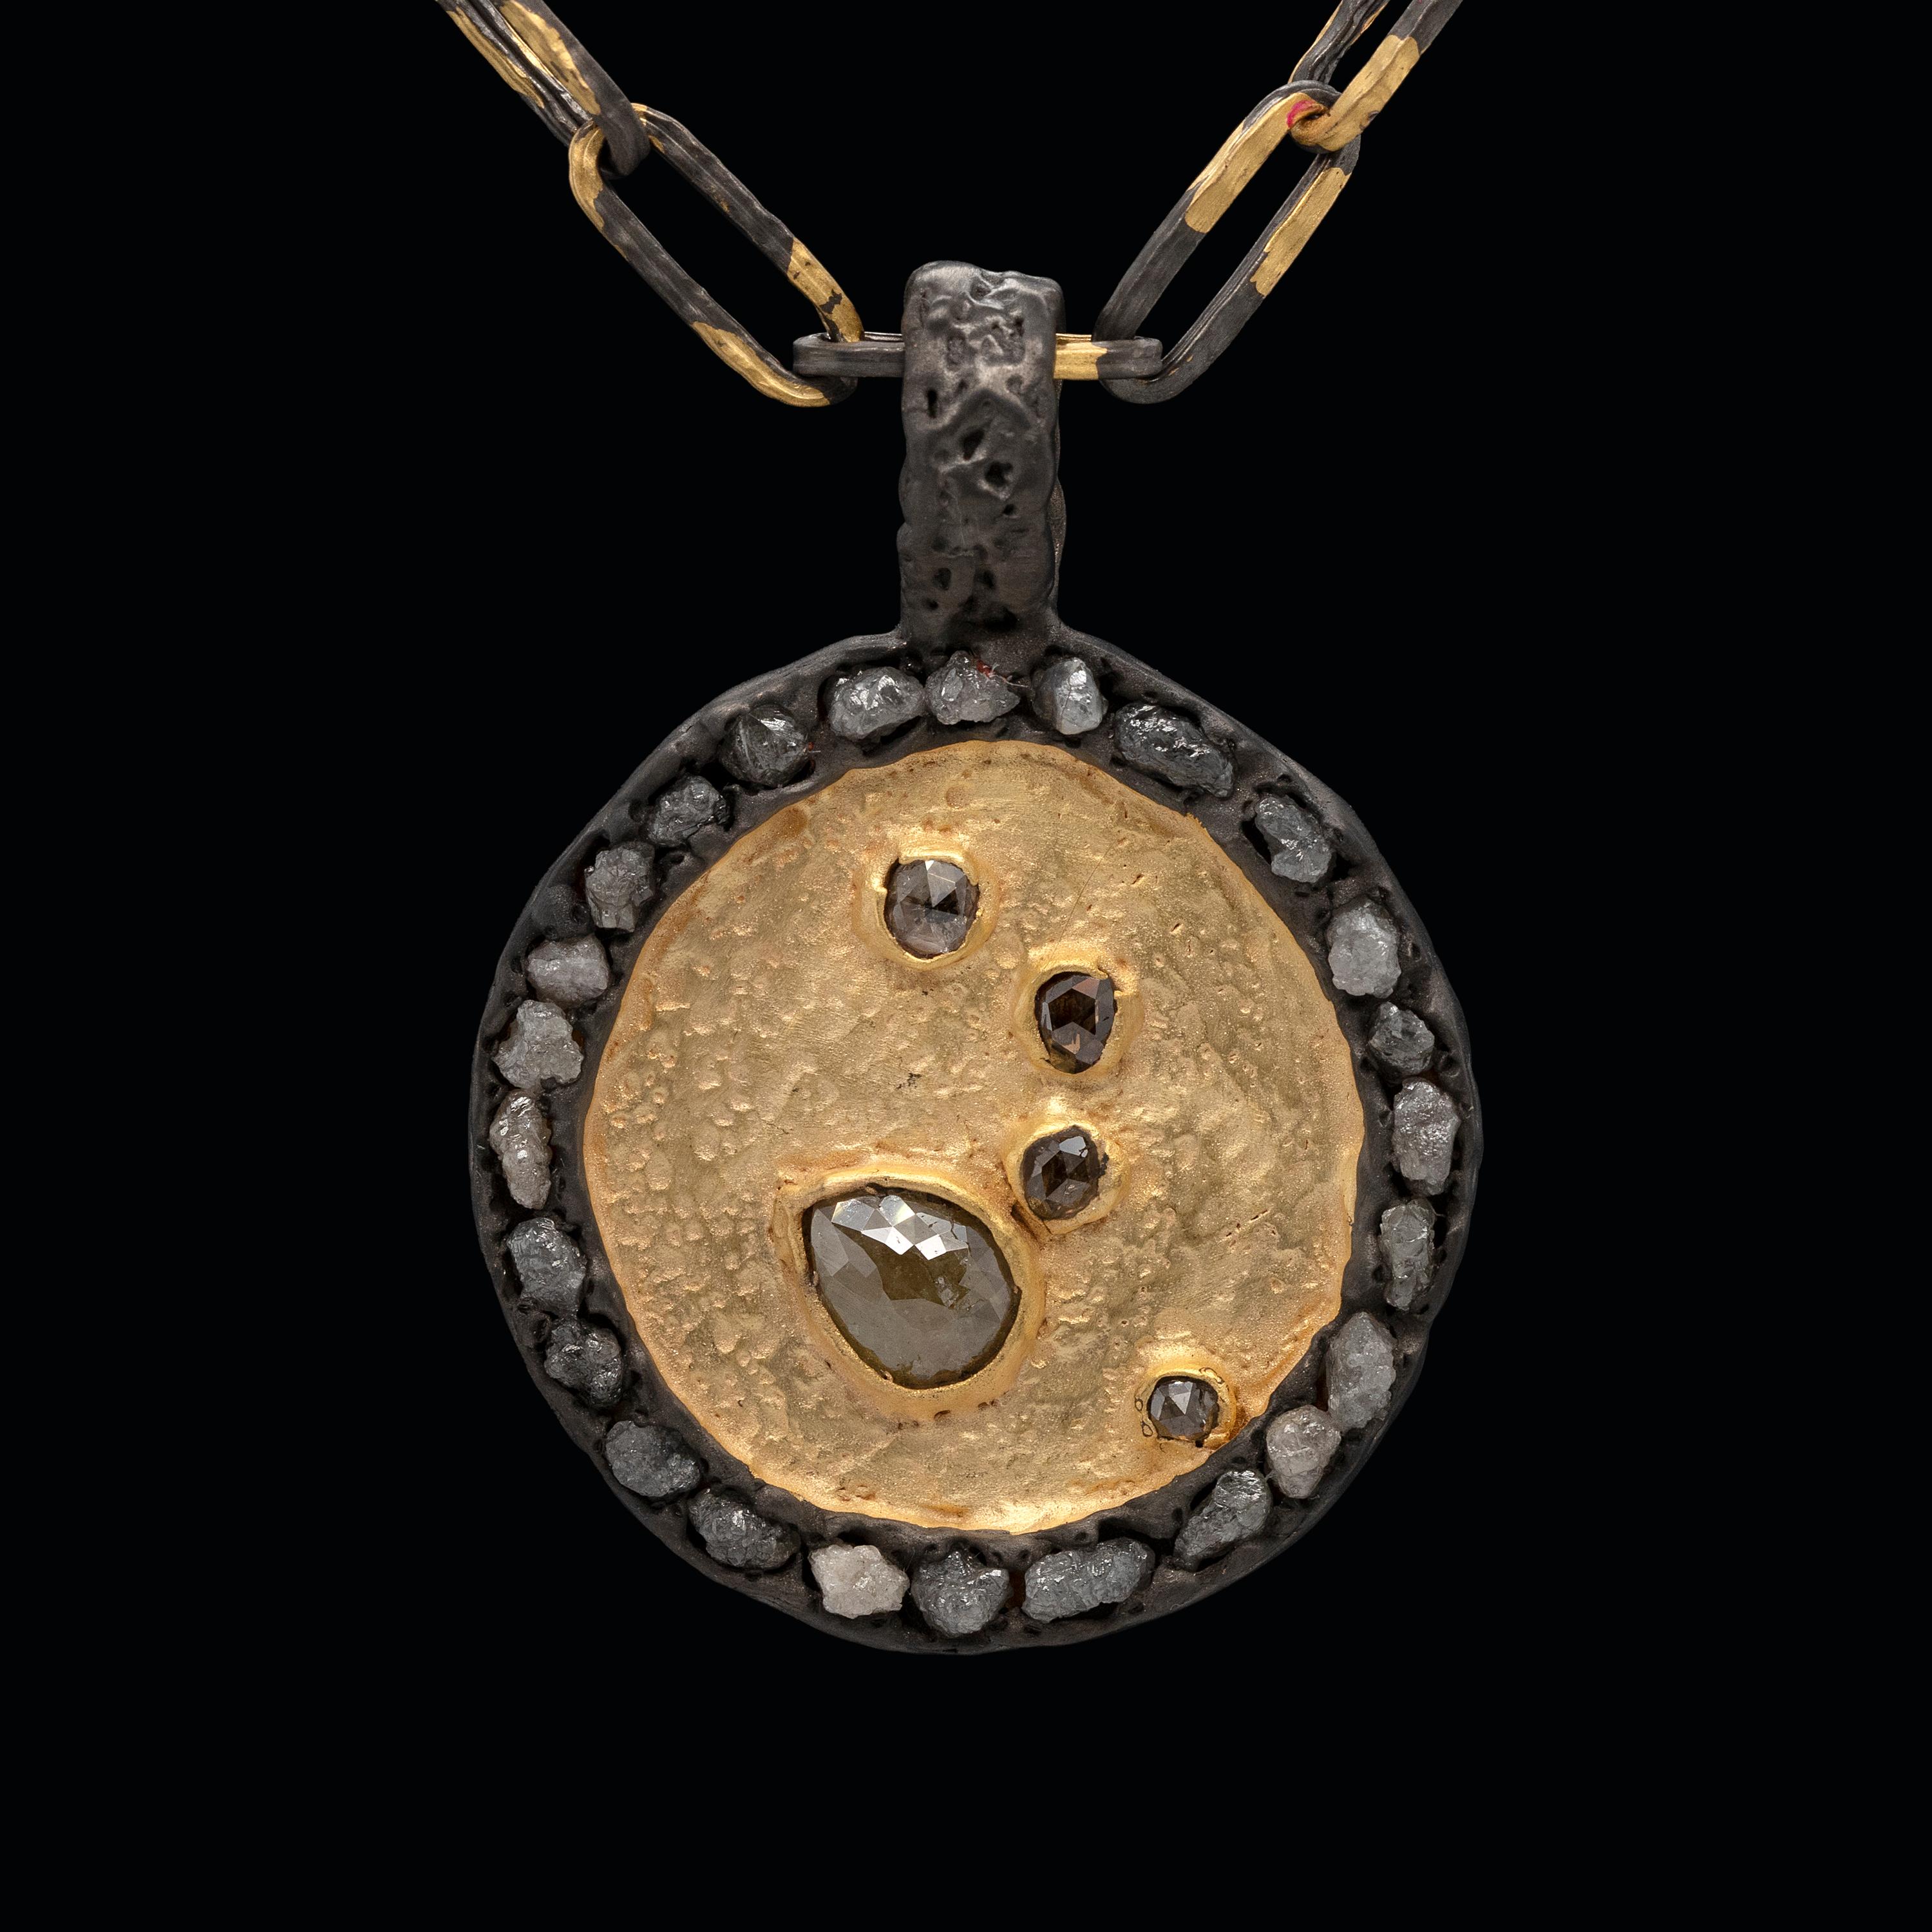 Is it not astonishing to know how stars form? Each celestial body is starkly distinct from the other, yet a constellation by itself becomes a whole unity, a mesmerising ensemble. Just like this yellow gold (18kt) plated pendant that features a mix